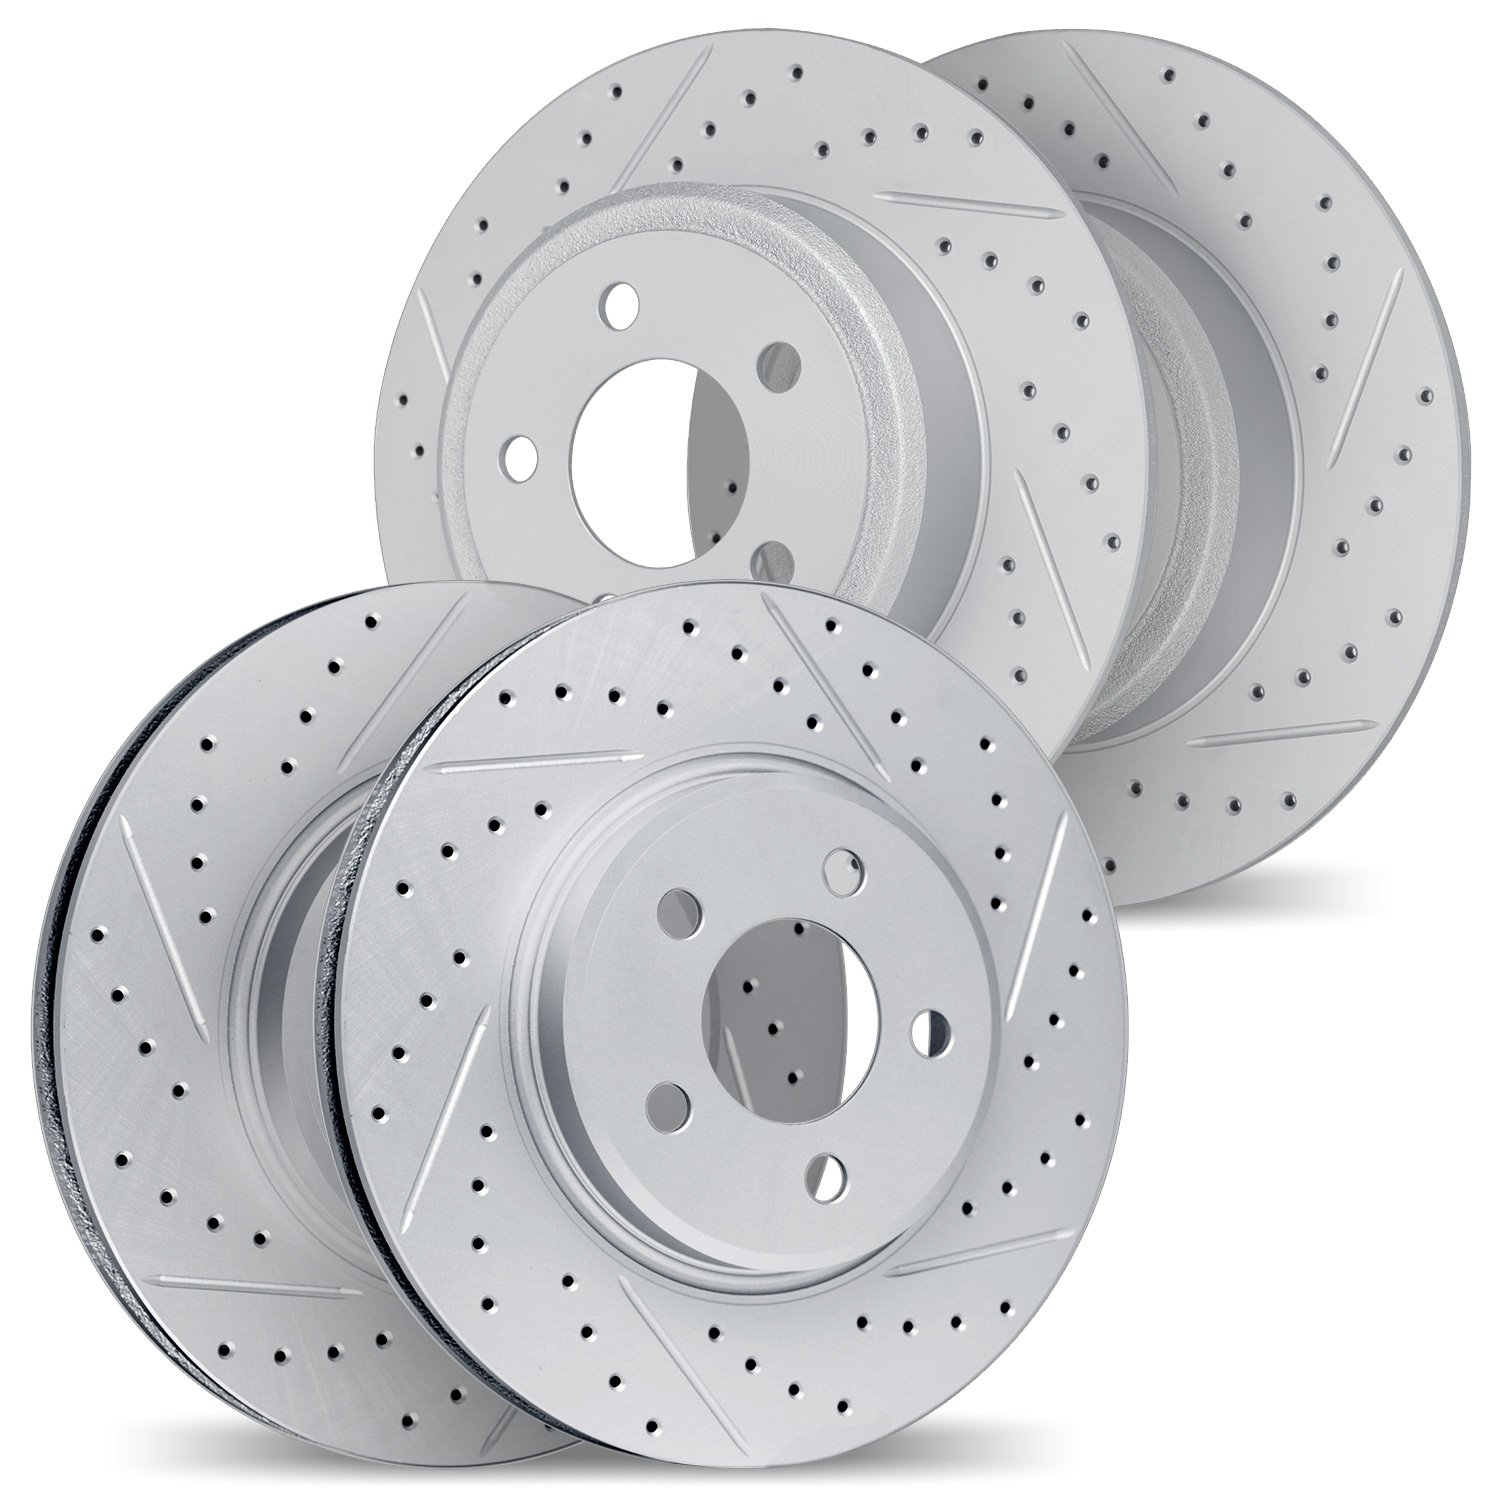 2004-54198 Geoperformance Drilled/Slotted Brake Rotors, 2006-2015 Ford/Lincoln/Mercury/Mazda, Position: Front and Rear